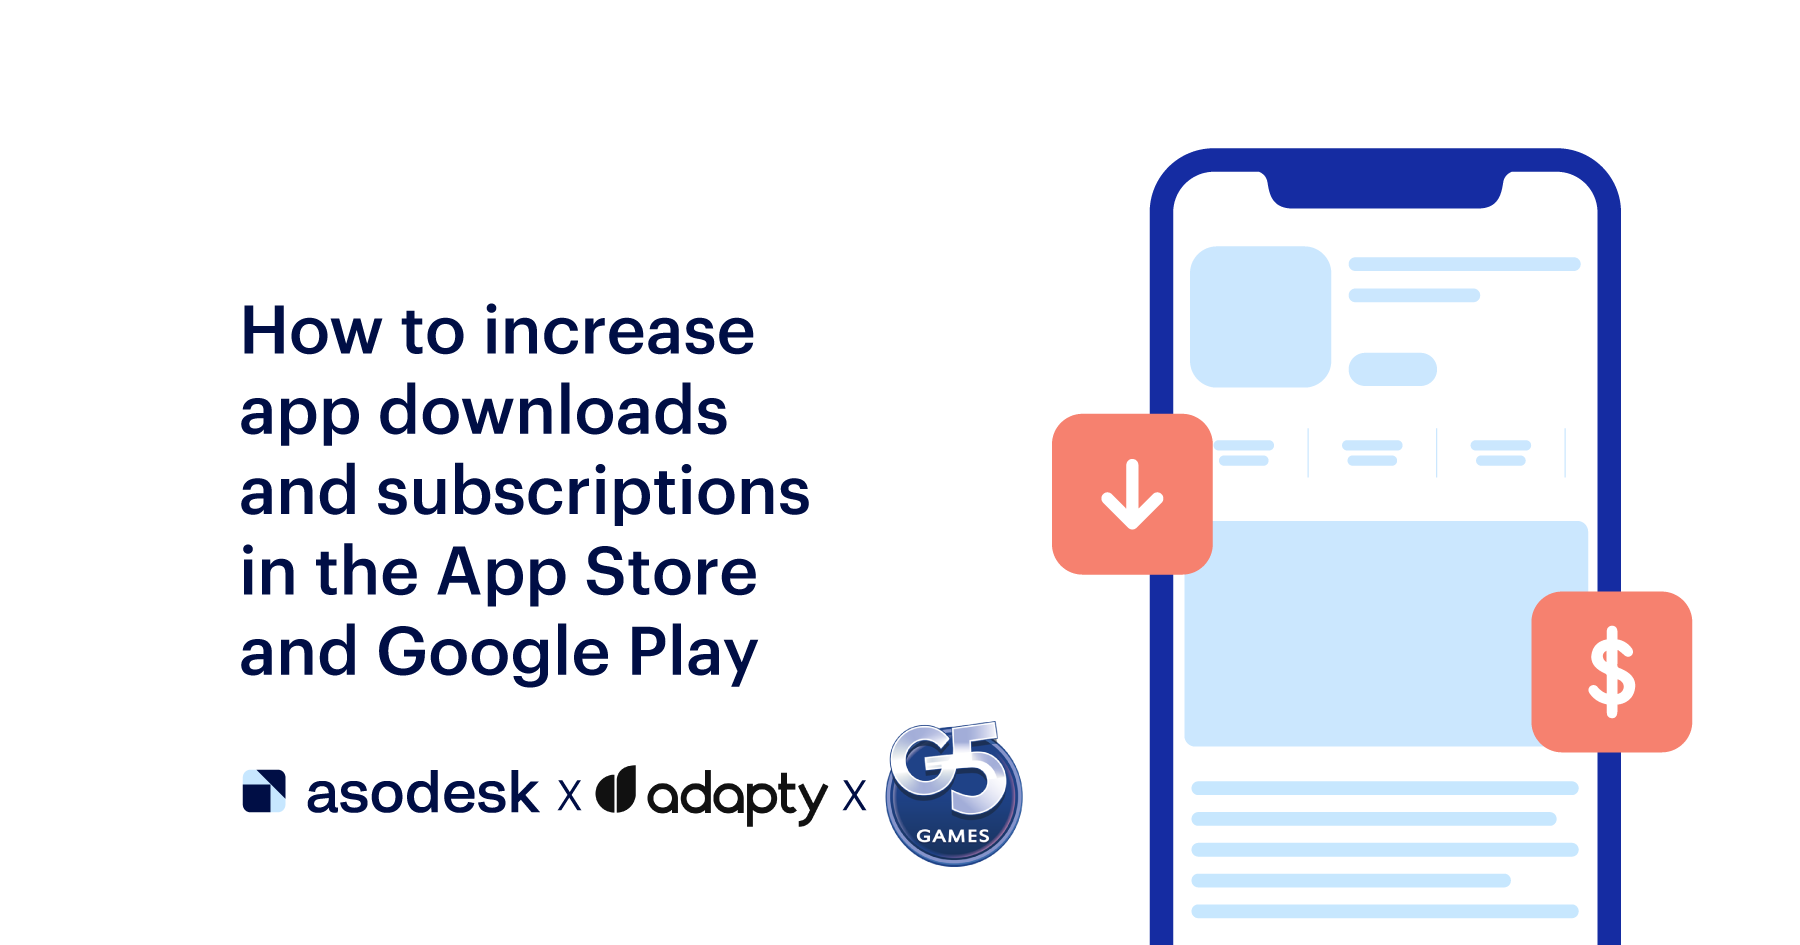 How to increase app downloads and subscriptions